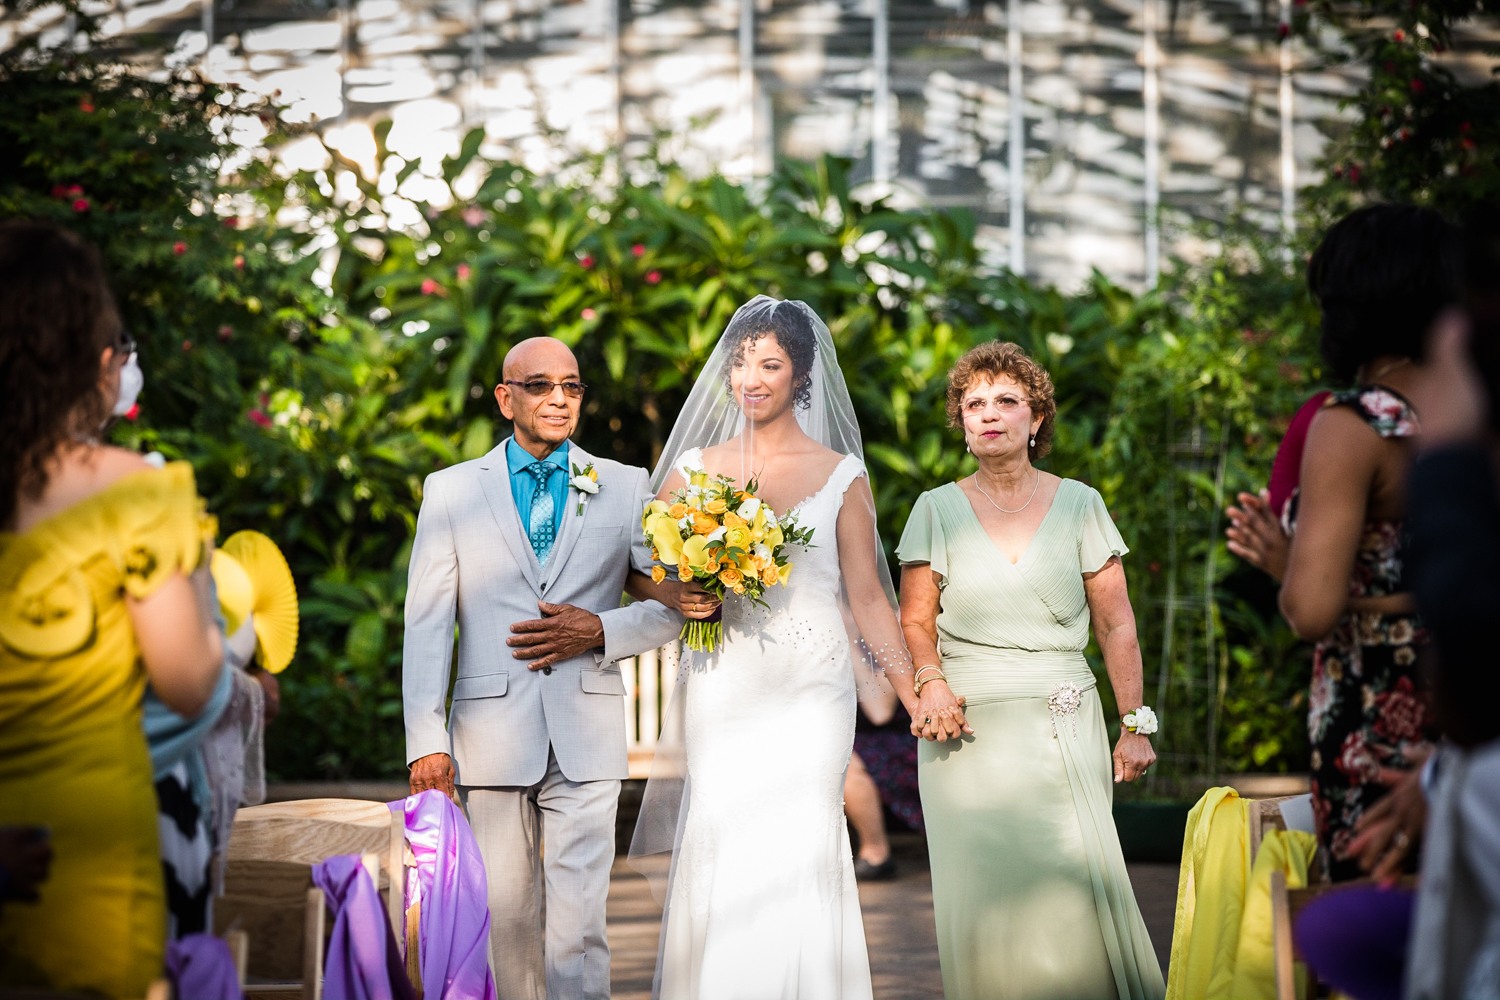 A bride walks down the aisle with her parents at a Garfield Park Conservatory wedding.